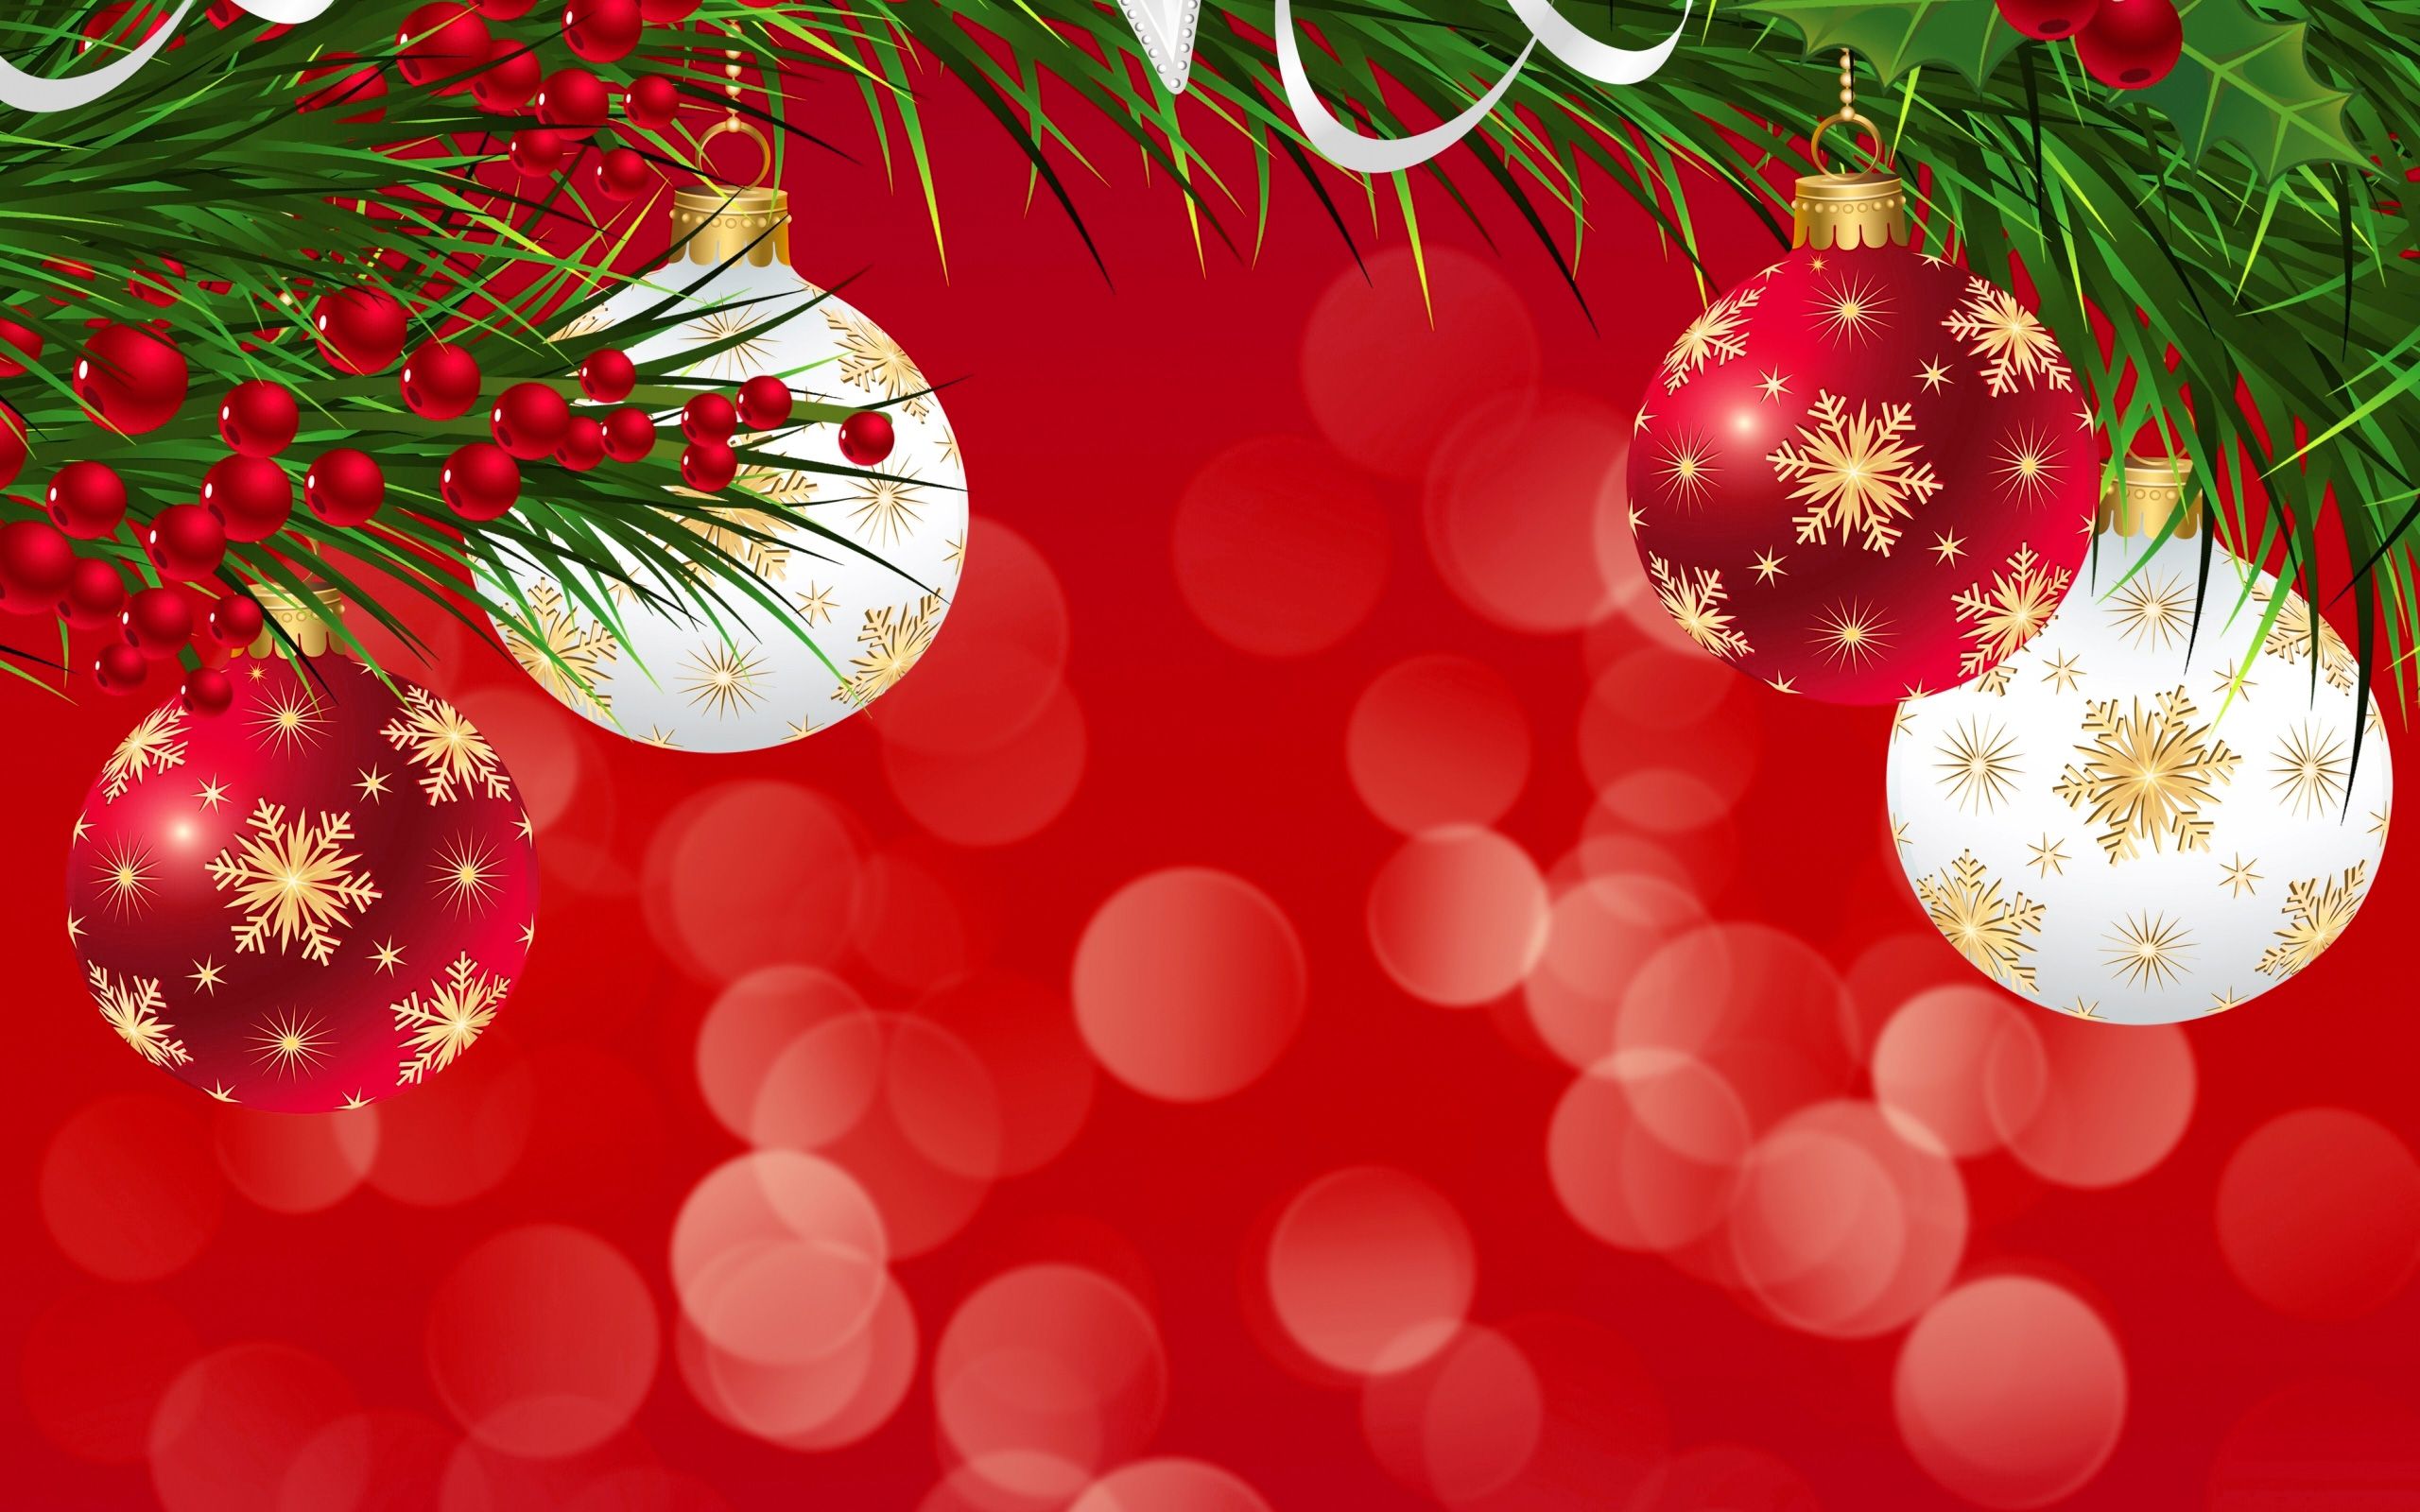 Year End Party Wallpapers - Top Free Year End Party Backgrounds ...